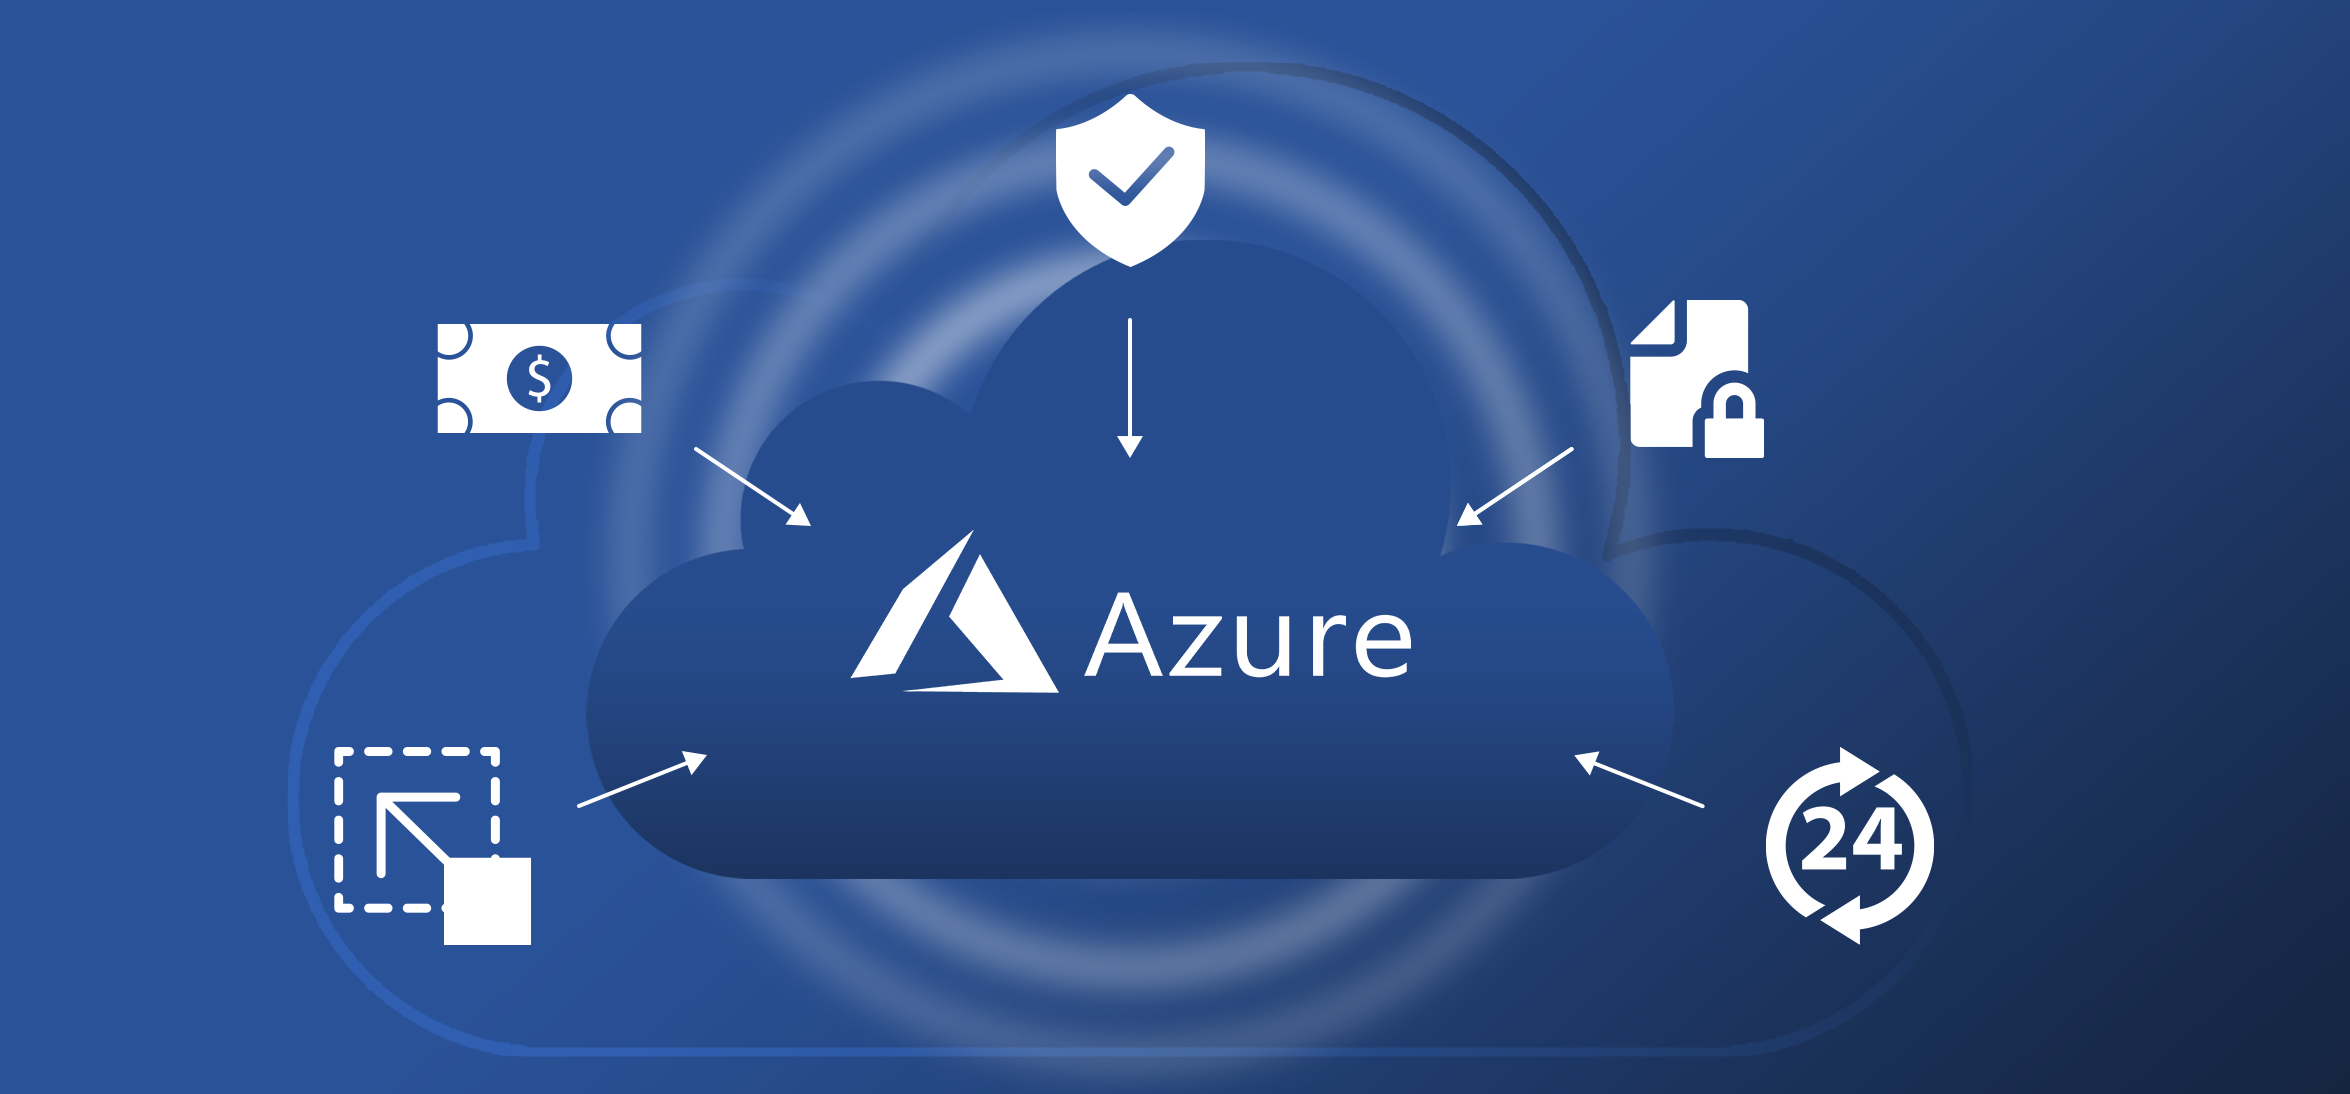 Microsoft Azure Administration and Consulting Services in Perth Amboy NJ, 08862